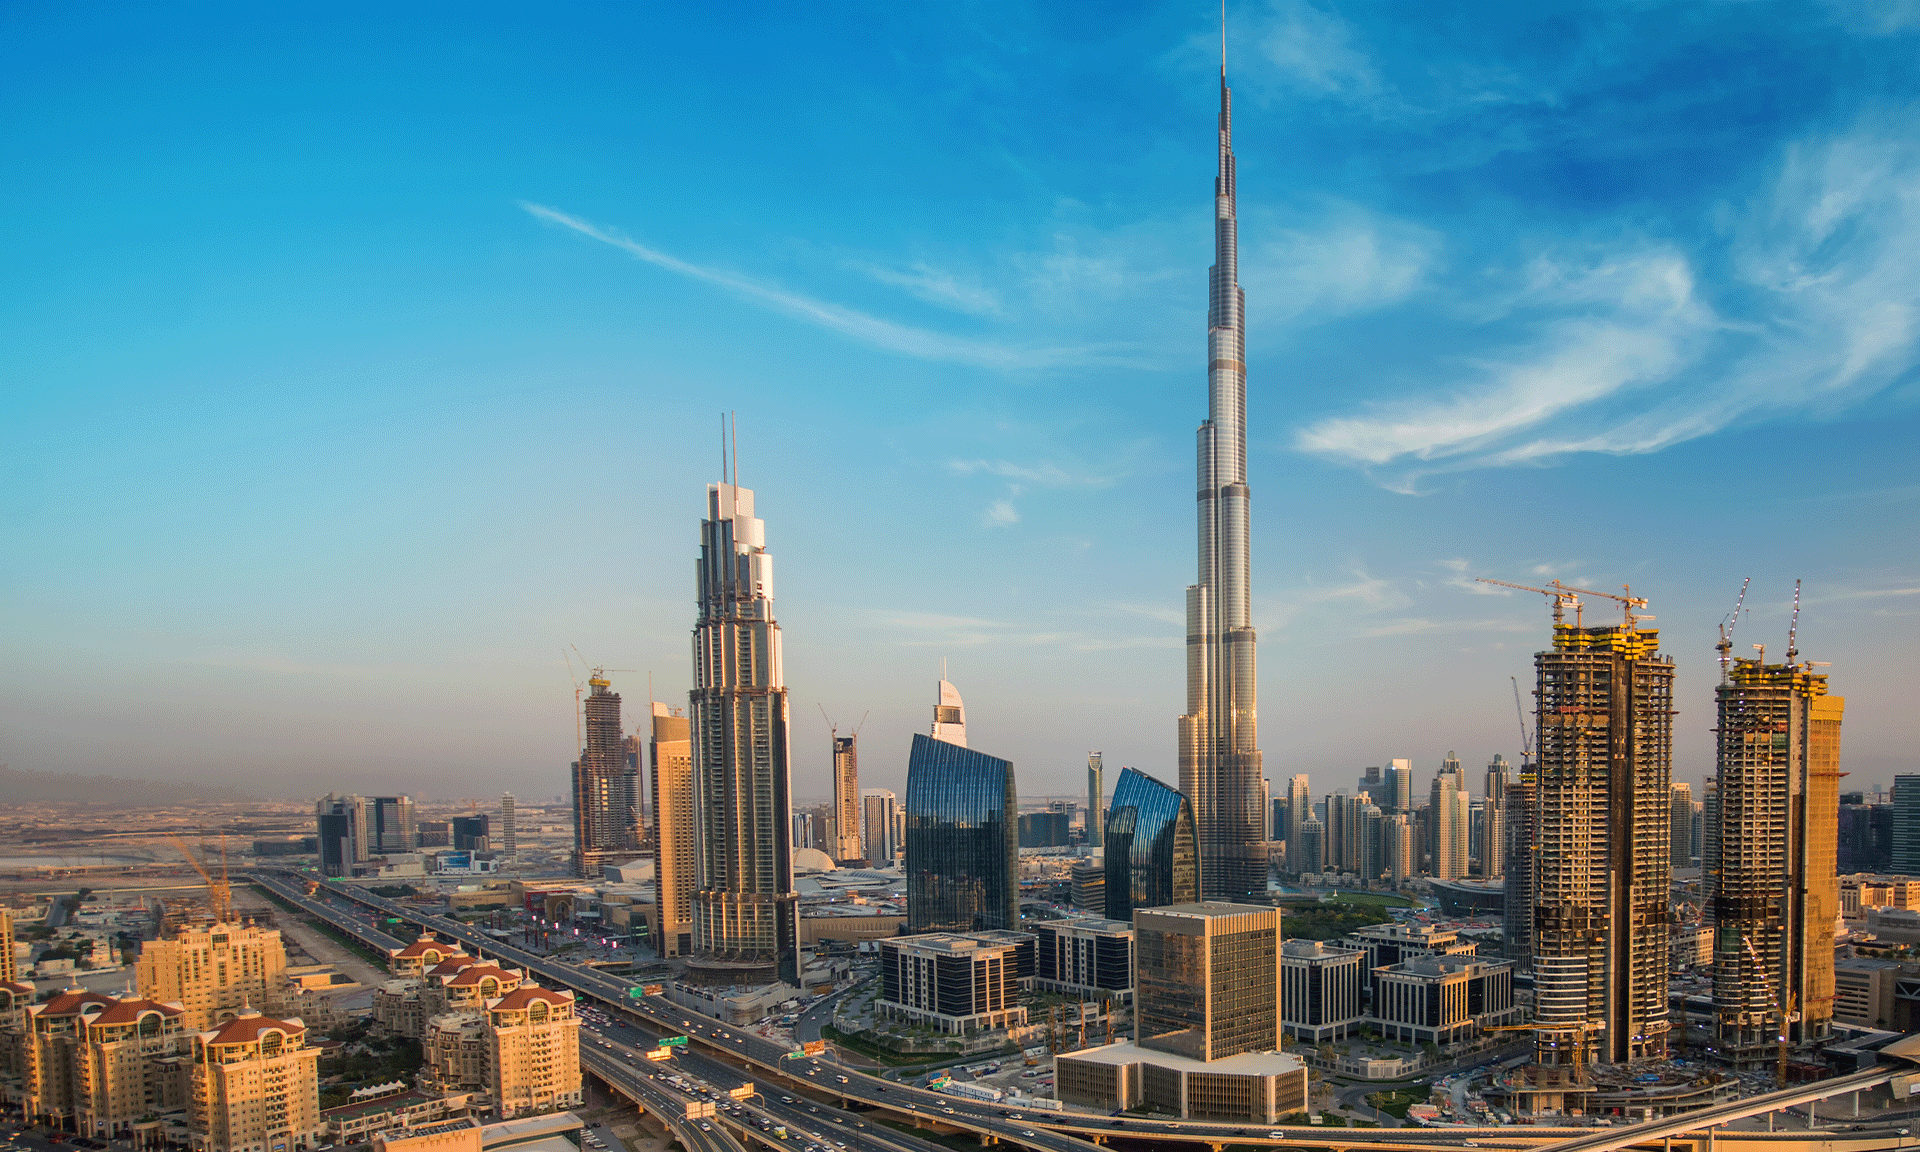 Want to Start a Business in Dubai: Dubai PRO Services Can Address All Your PRO Needs